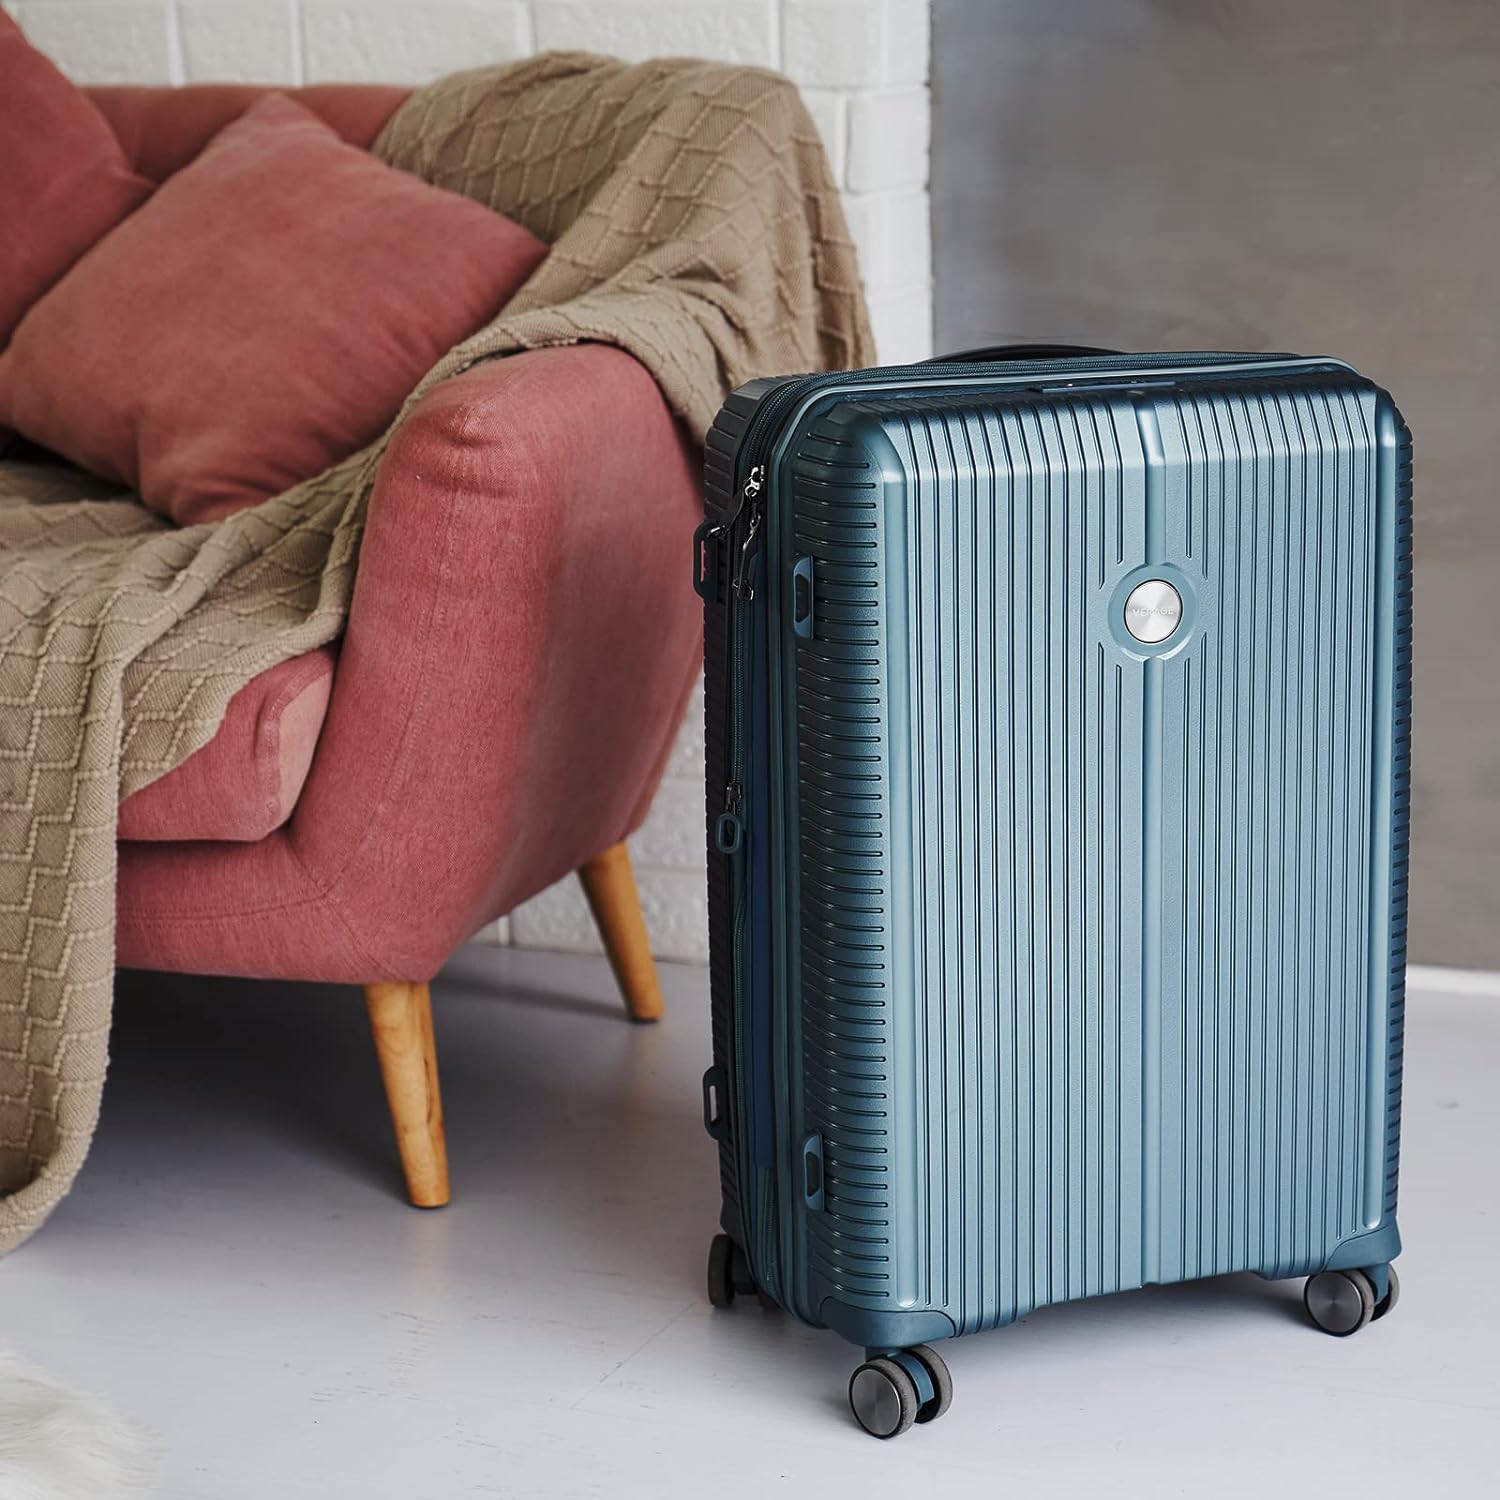 Rome (Cabin Carry-On Suitcase)